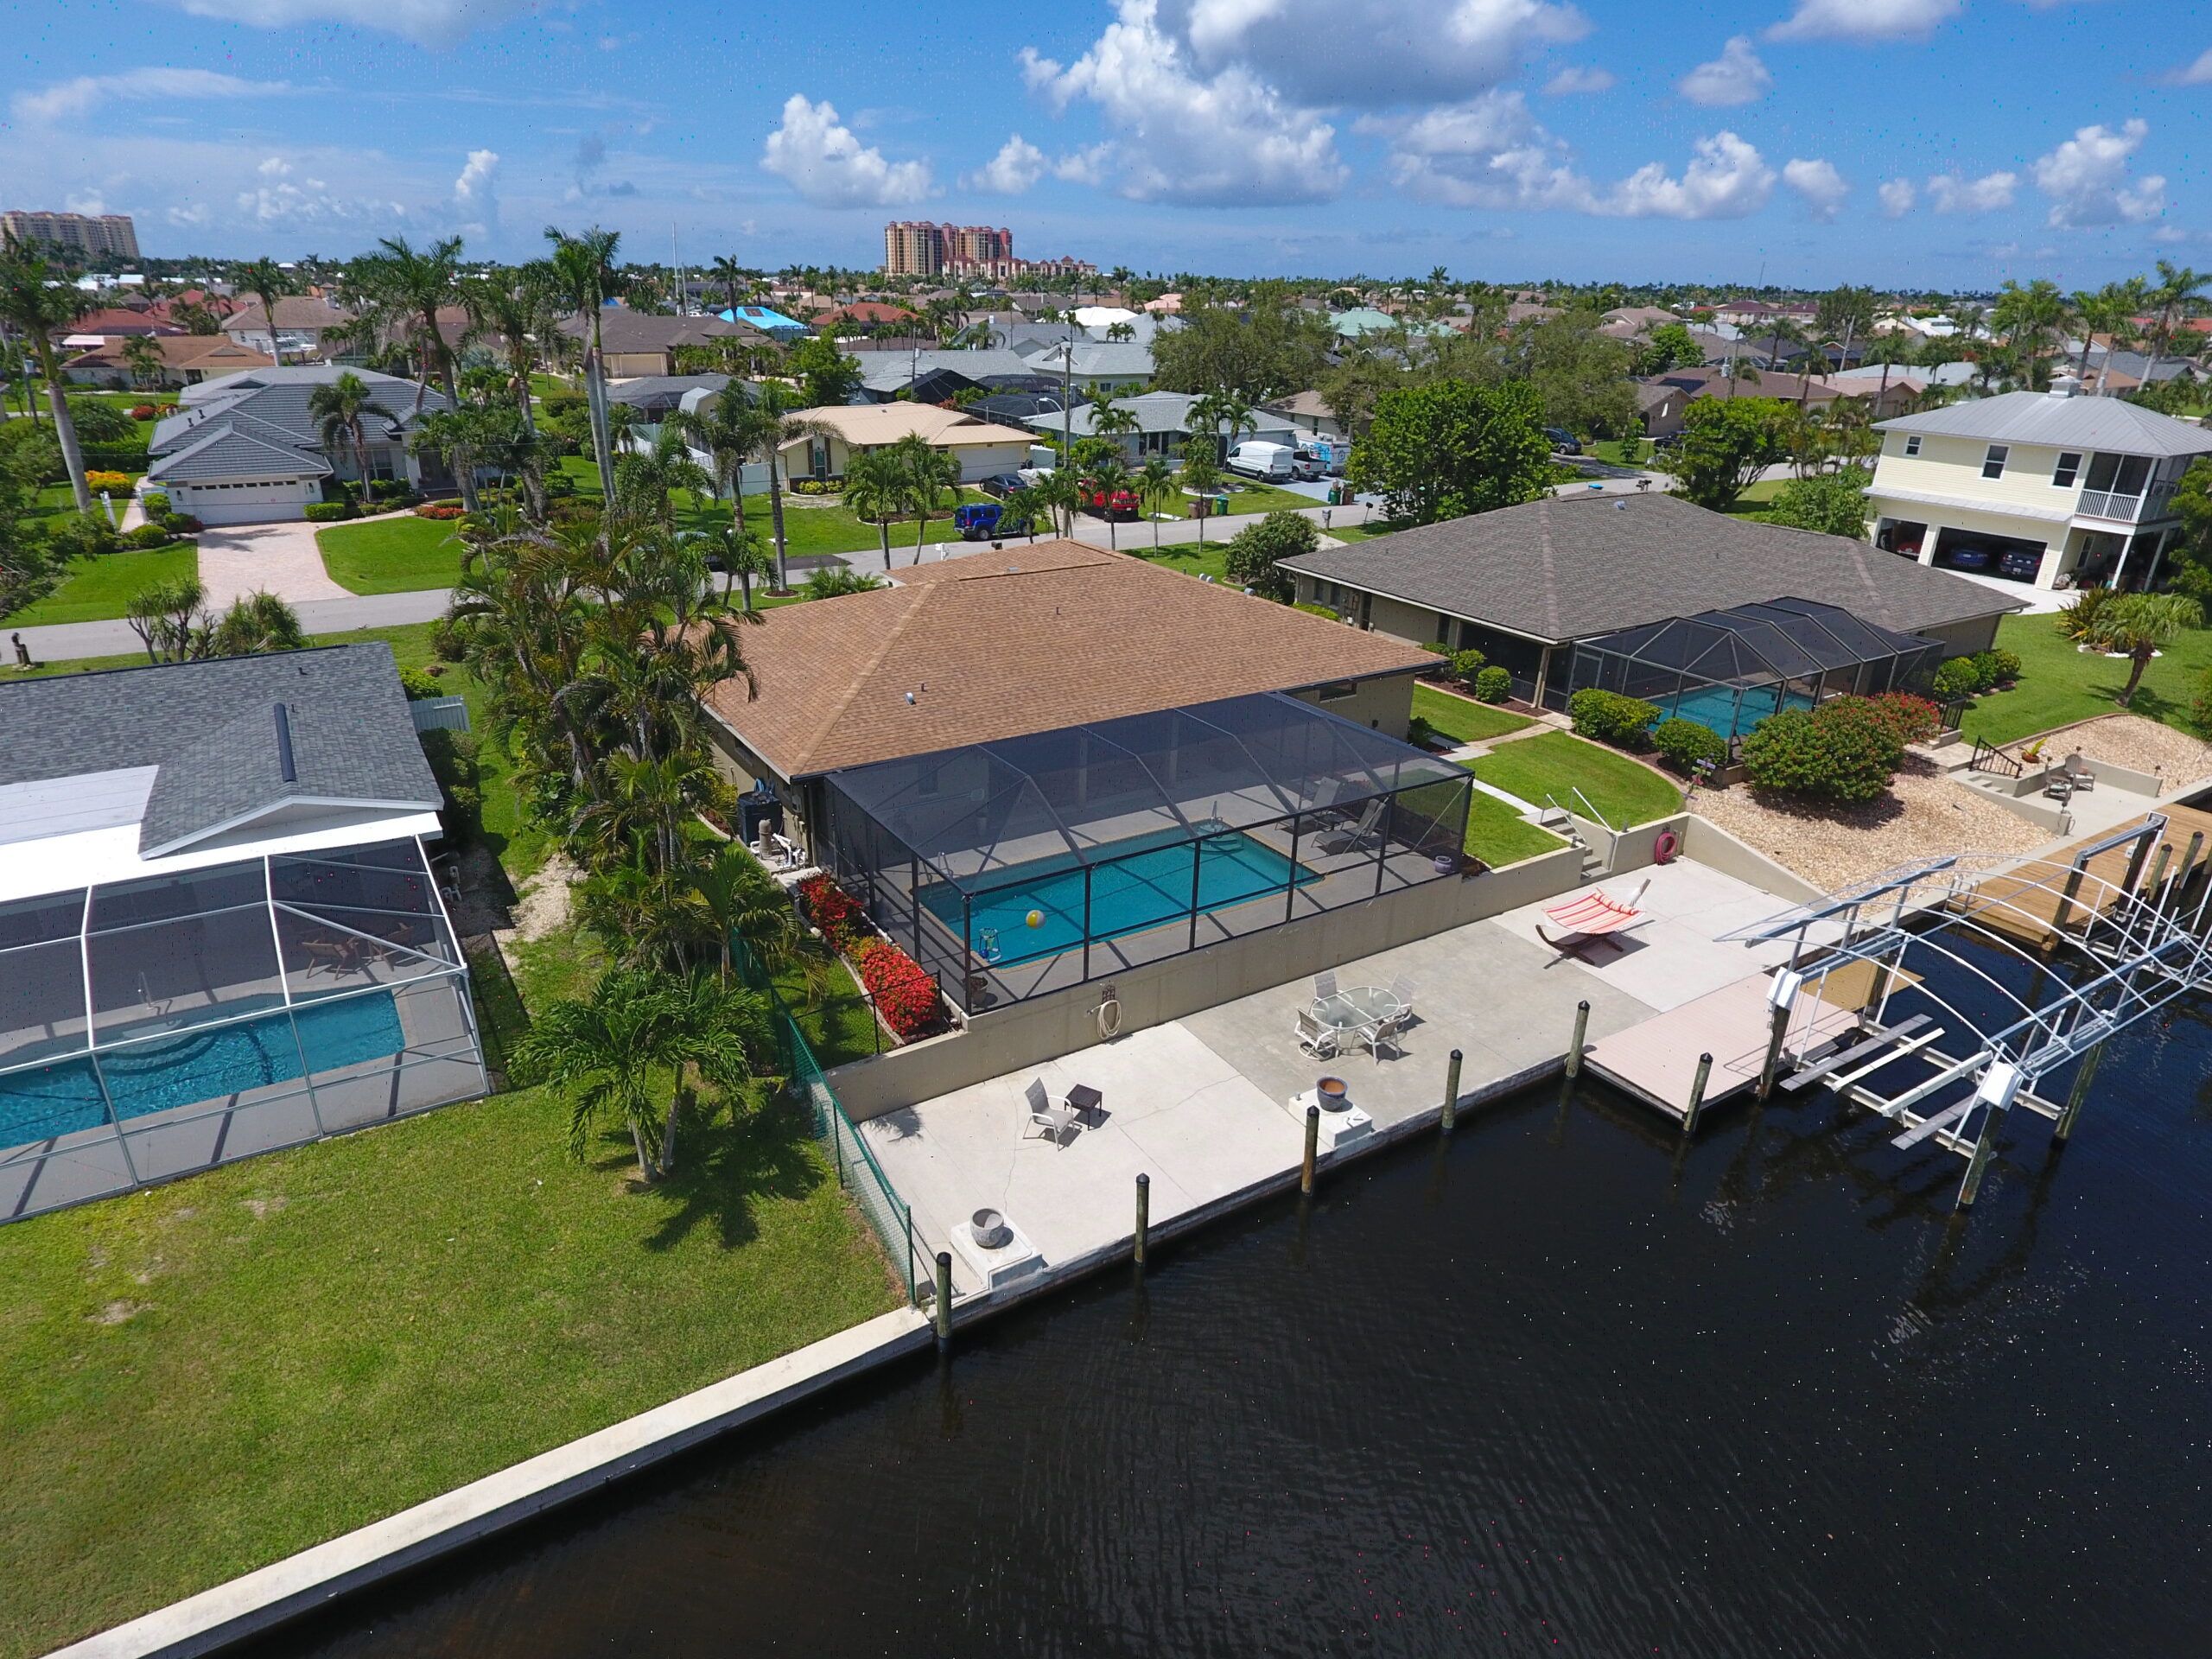 Discover your own slice of waterfront luxury in this exceptional home, perfectly designed for both boating enthusiasts and those who crave the coastal lifestyle.